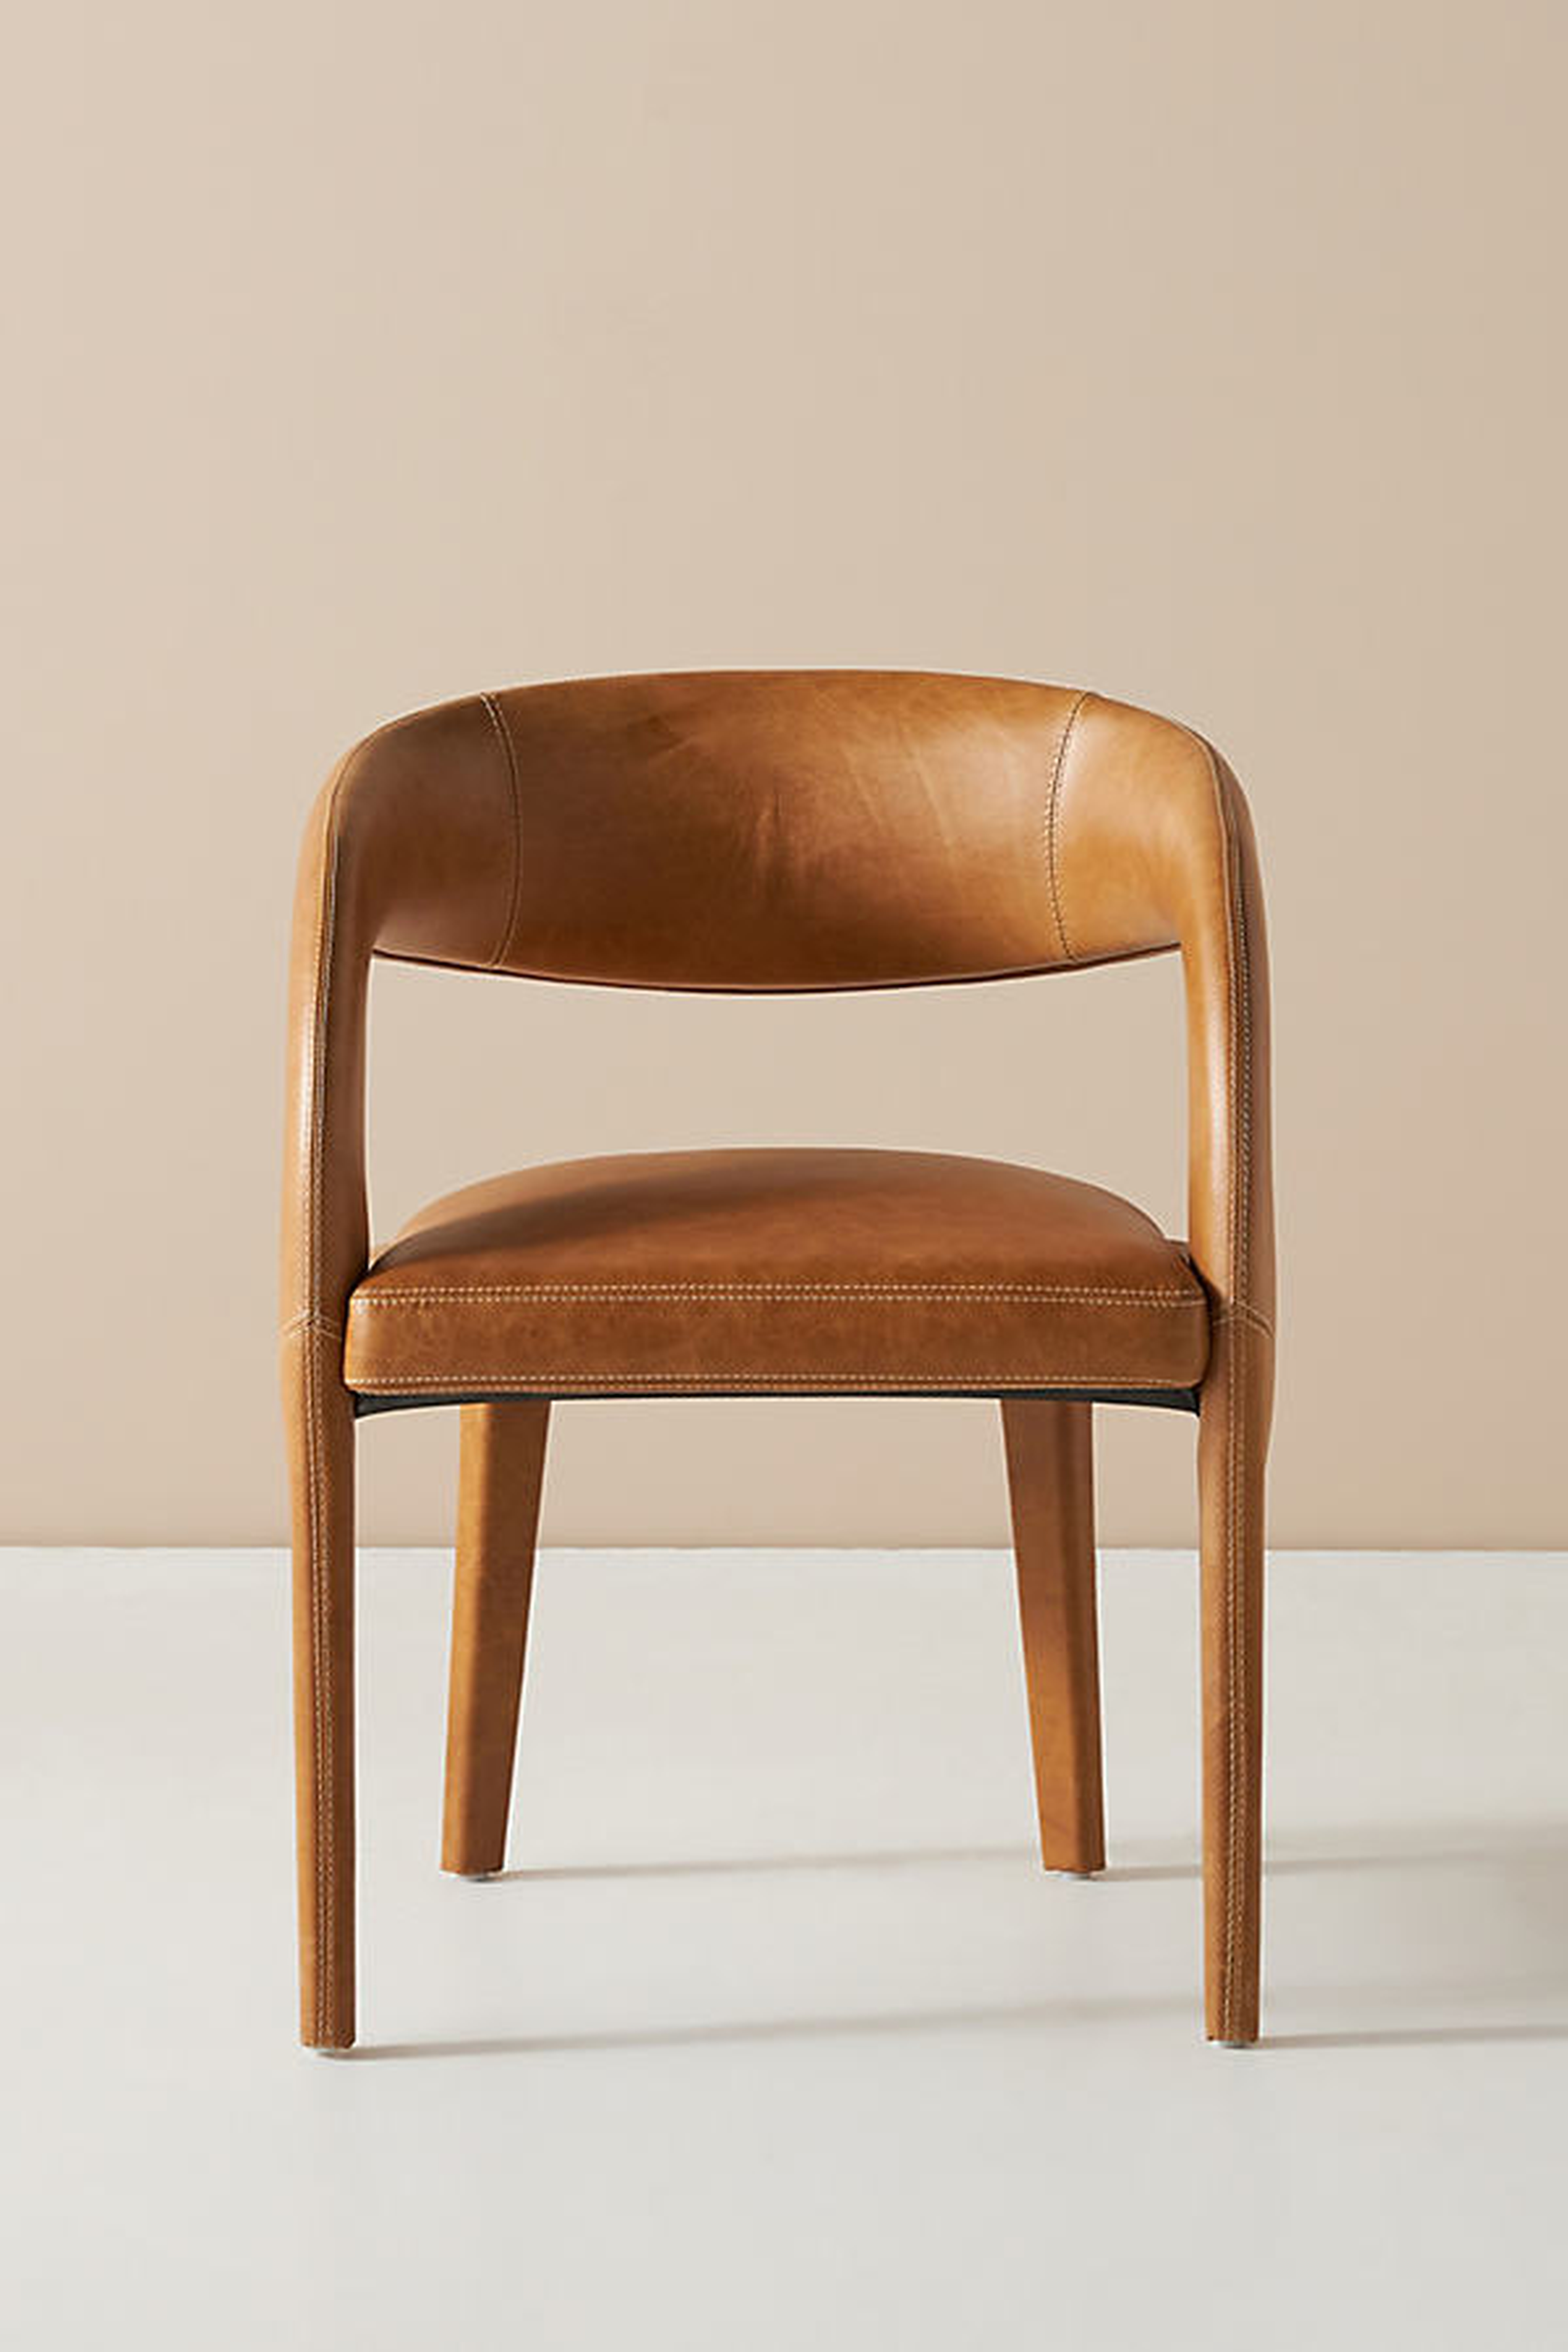 Leather Hagen Dining Chair By Anthropologie in Brown - Anthropologie